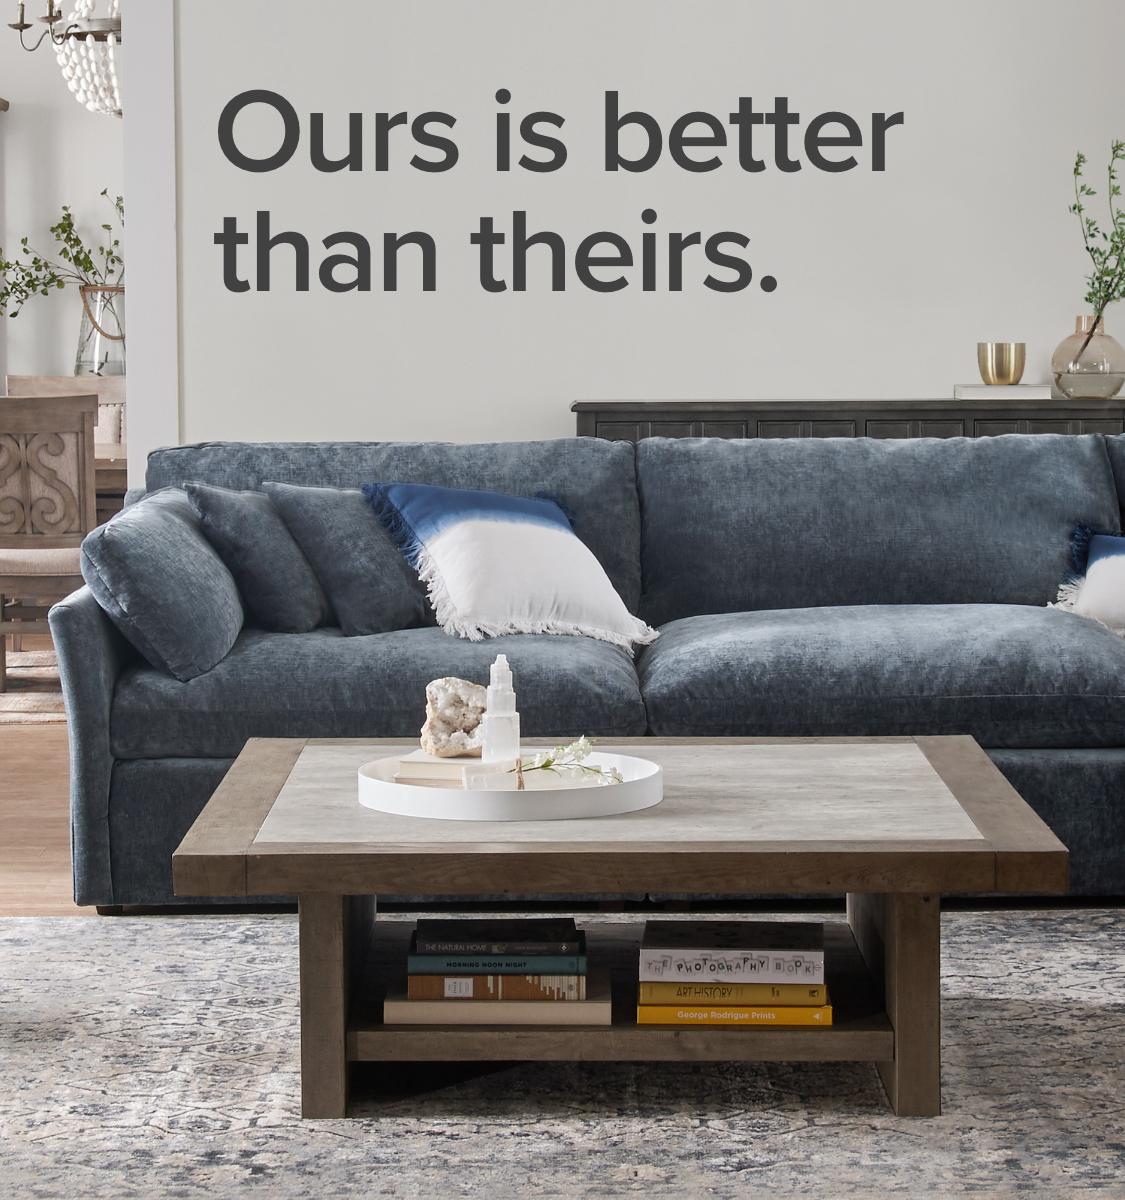 Living Room Furniture Stores Near Me - fanficisatkm53